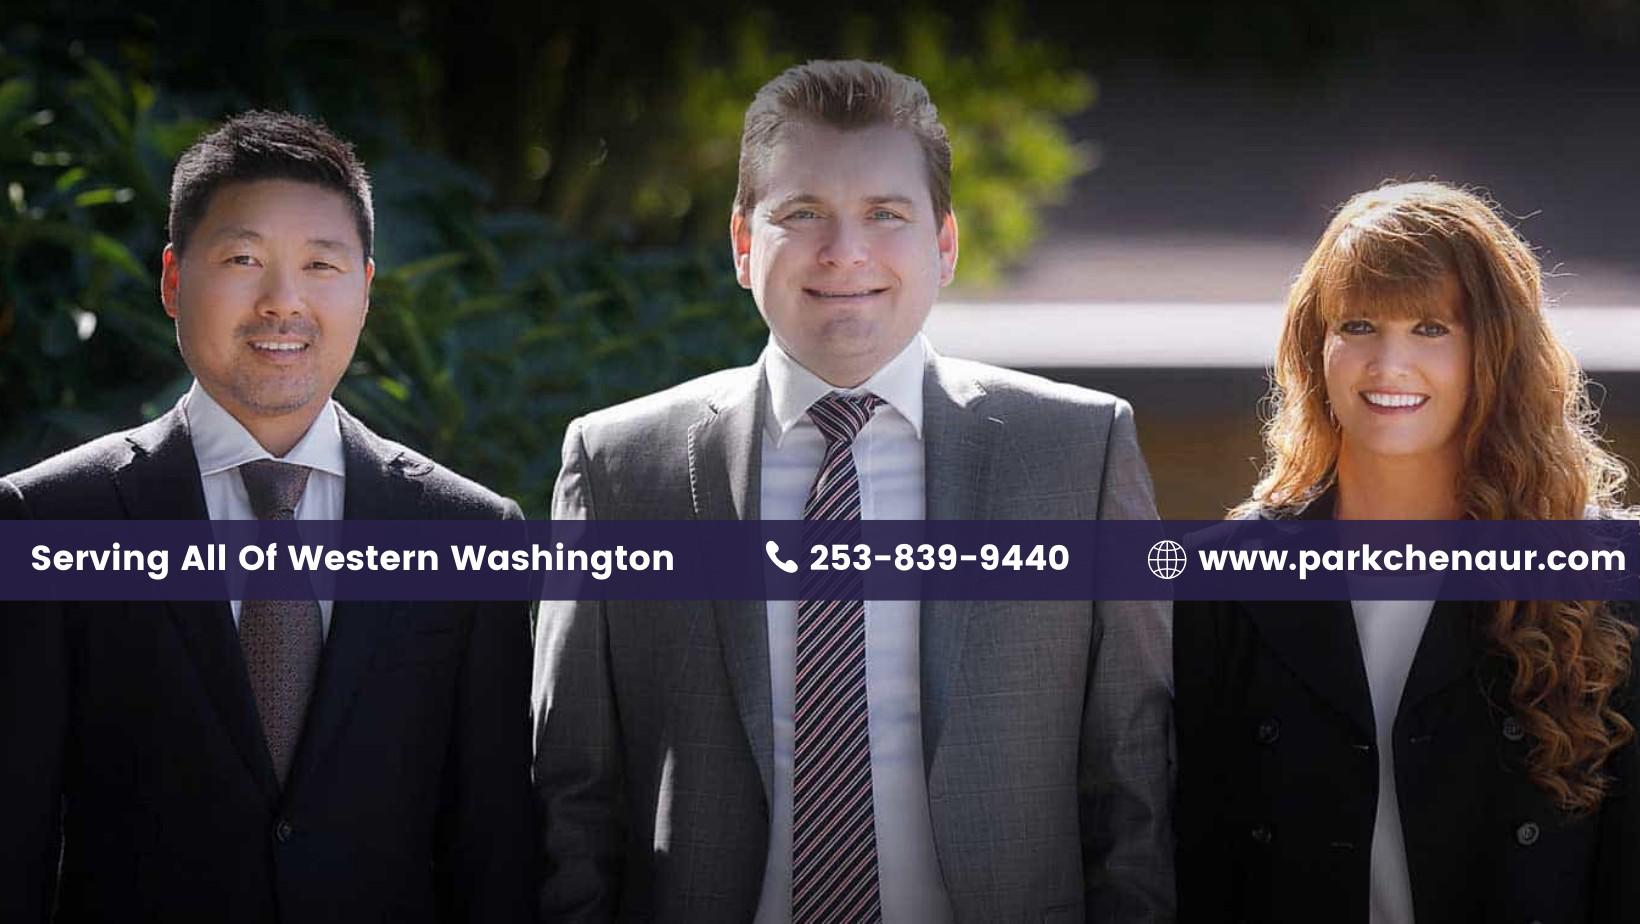 We continually strive for excellence in every aspect of our law practice. We truly believe that our friendship, our willingness to really listen and connect with our clients, and our synergy are what sets us apart from other law firms.